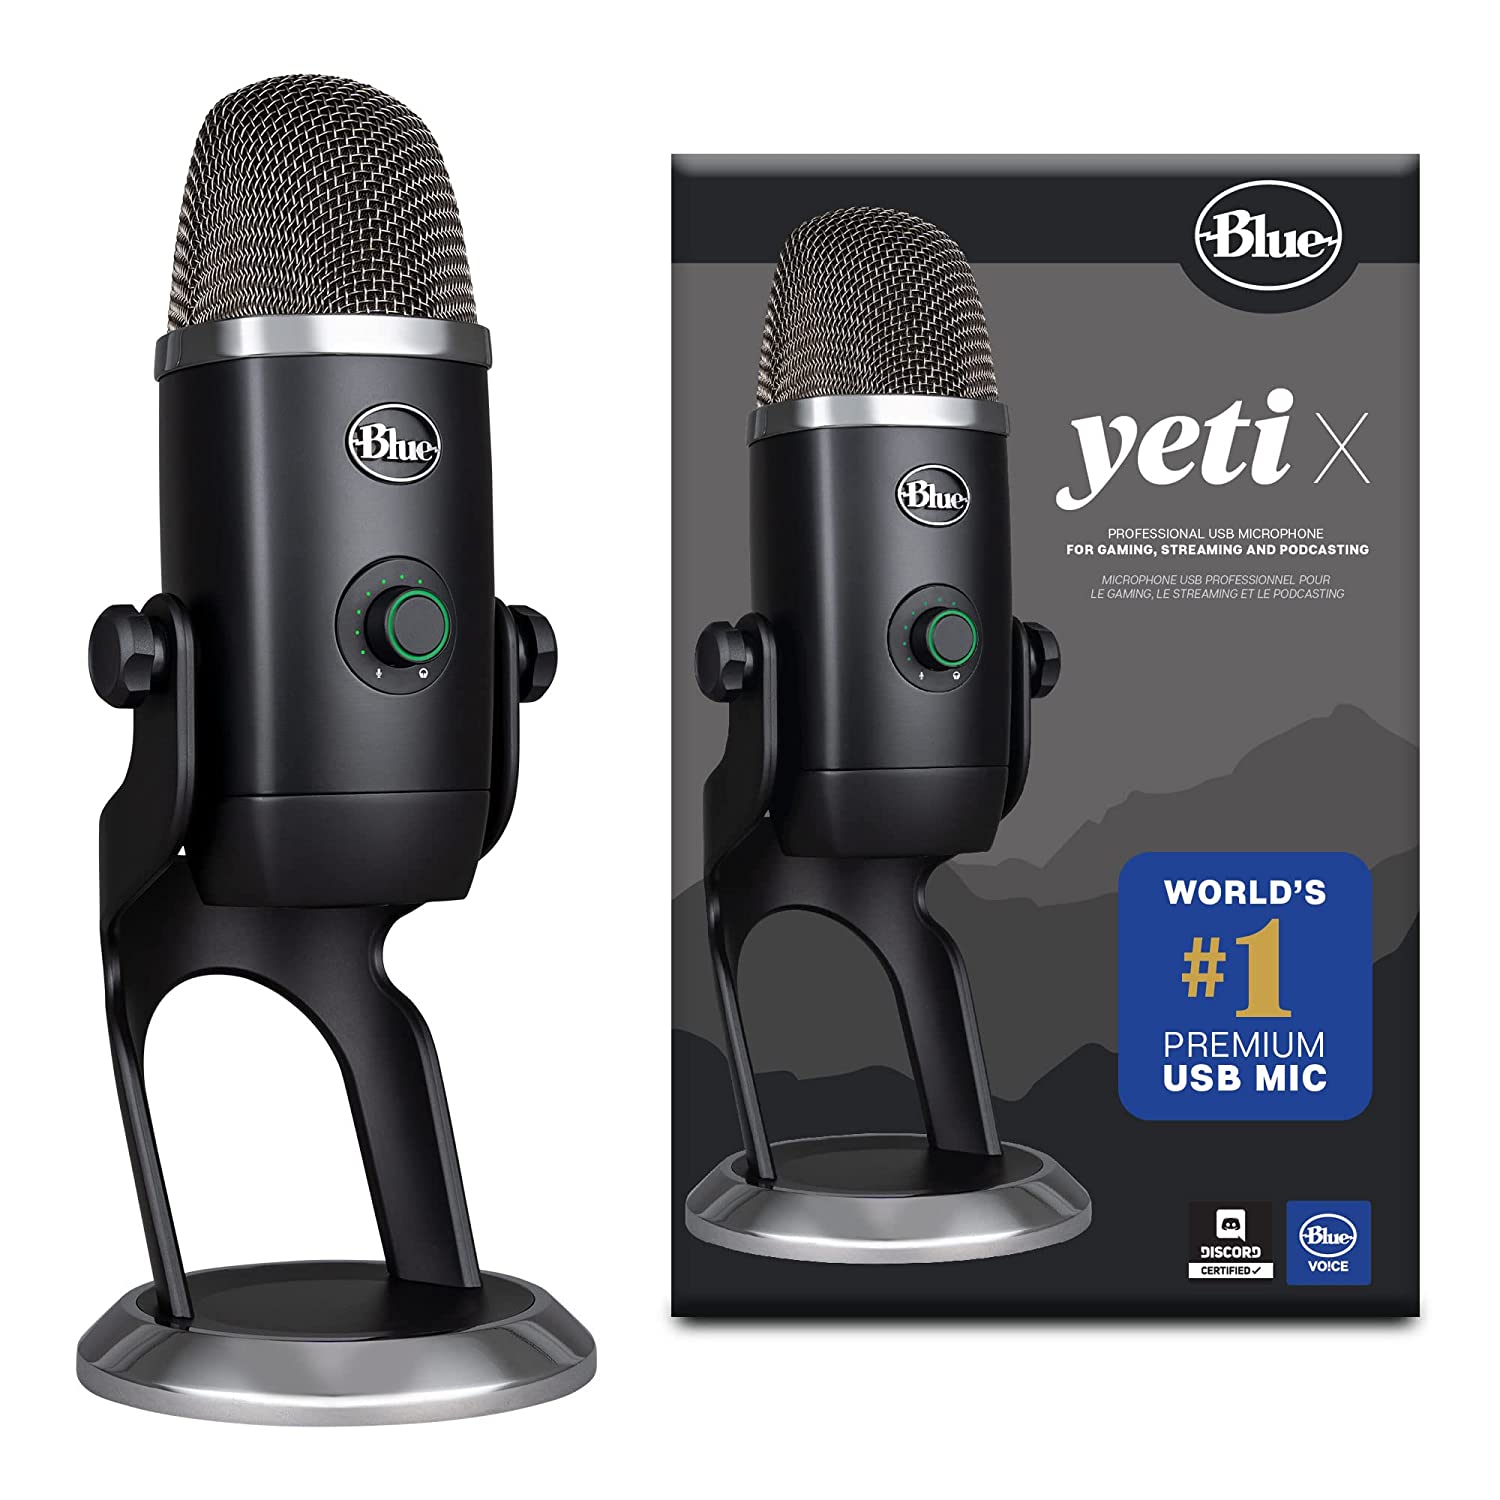 Blue yeti X PROFESSIONAL MULTI-PATTERN USB MICROPHONE WITH BLUE VO!CE - Golchha Computers